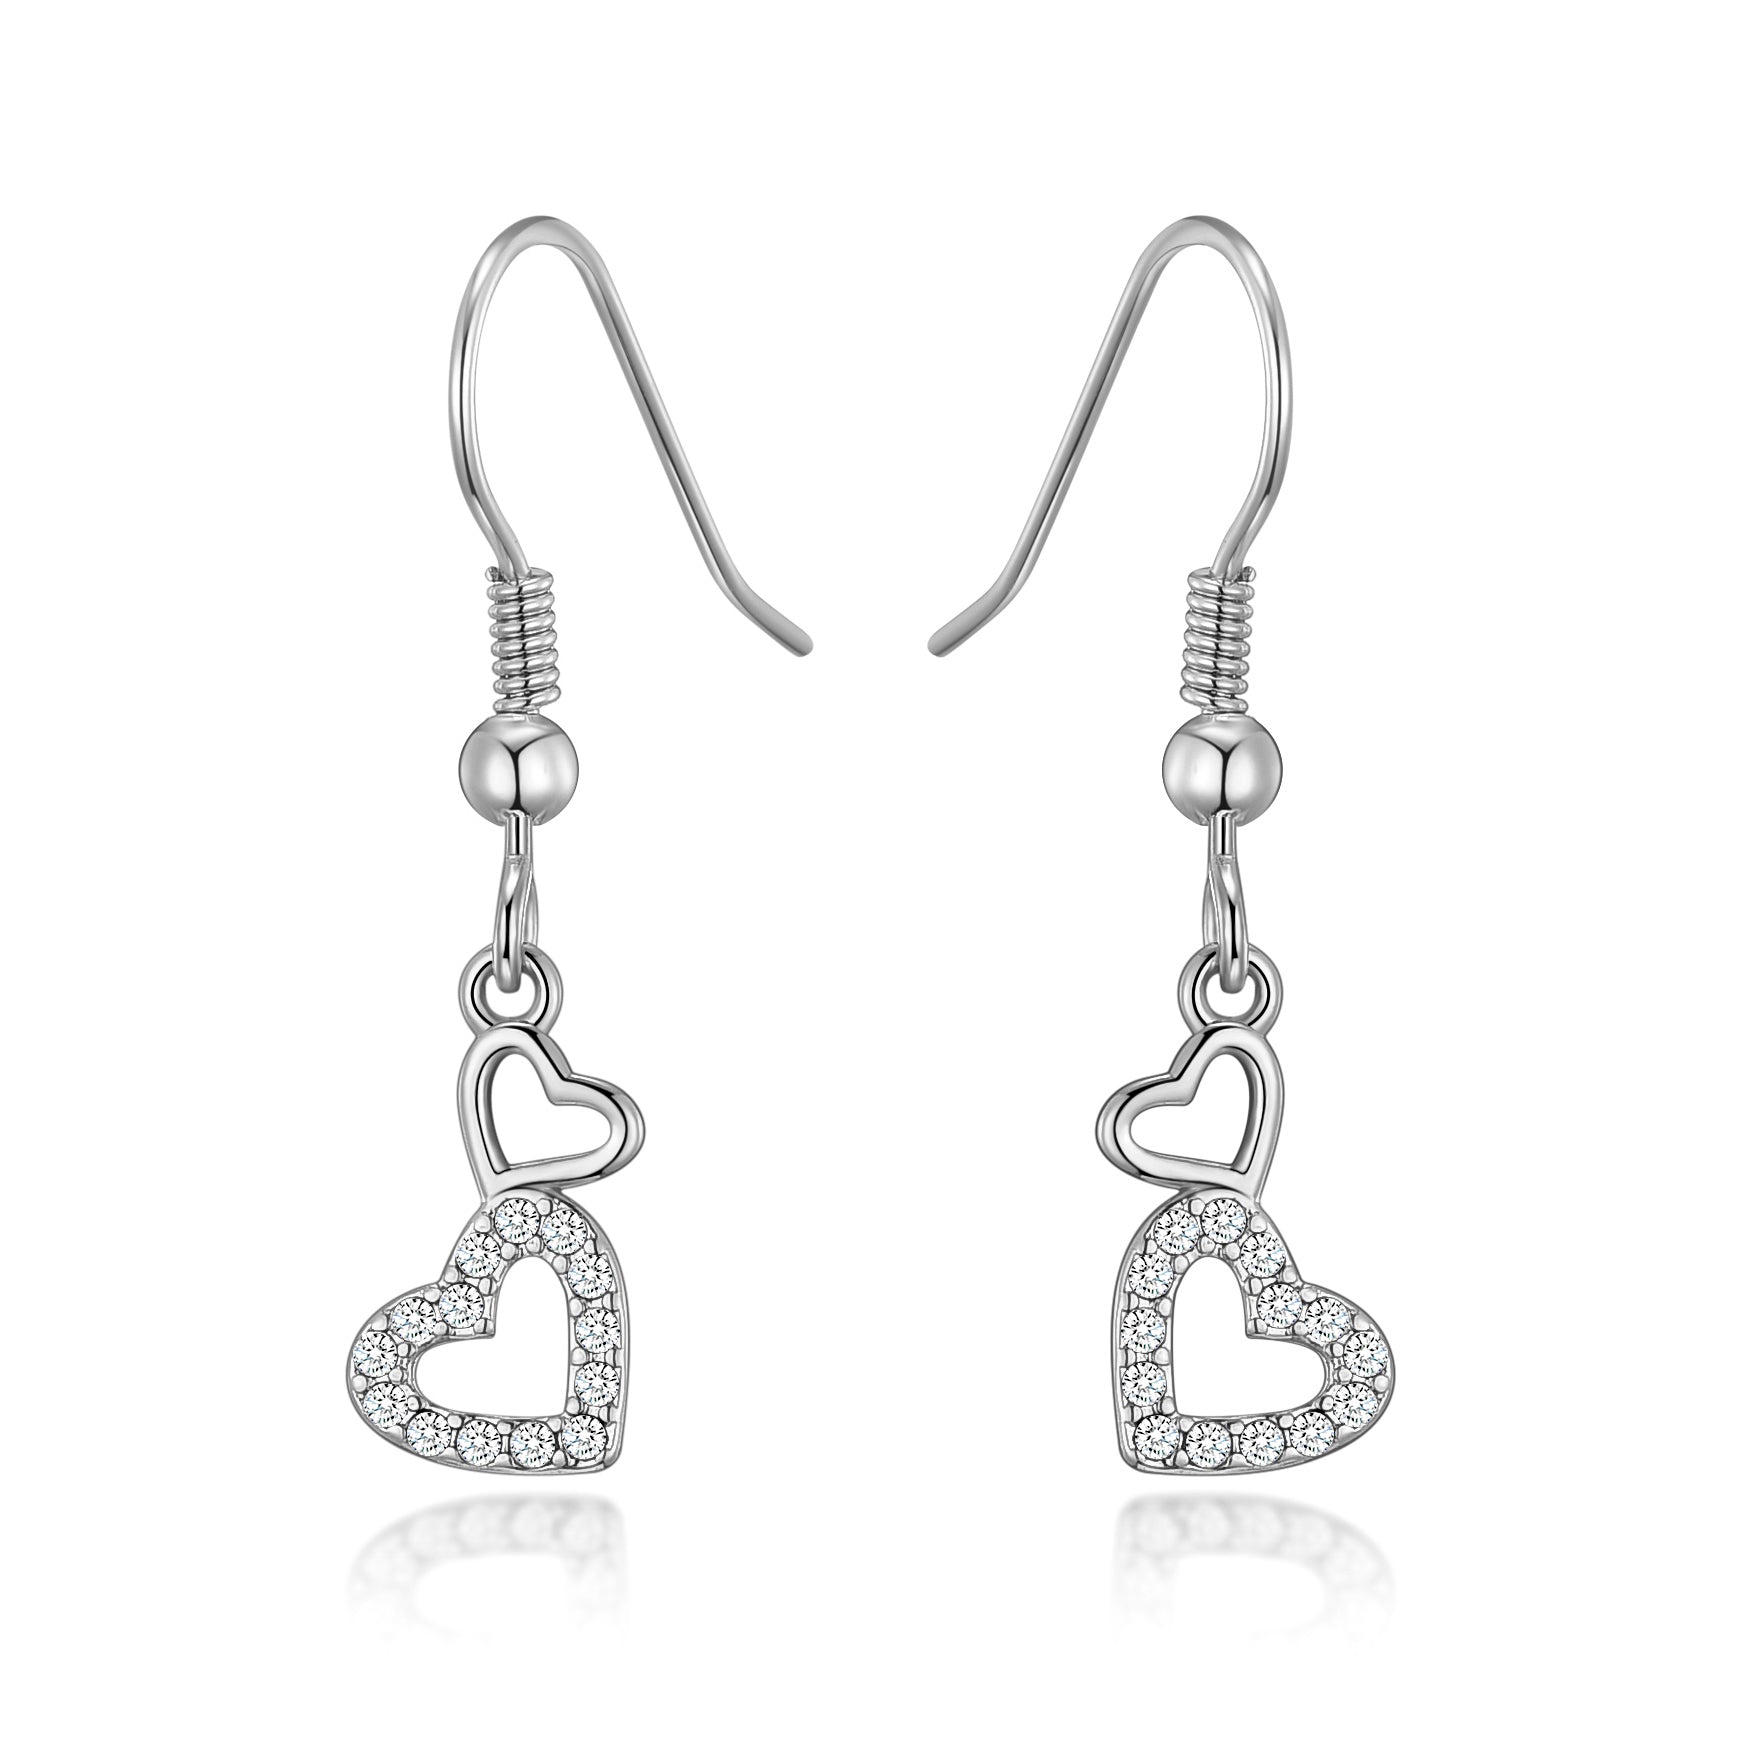 Silver Plated Double Heart Drop Earrings Created with Zircondia® Crystals by Philip Jones Jewellery